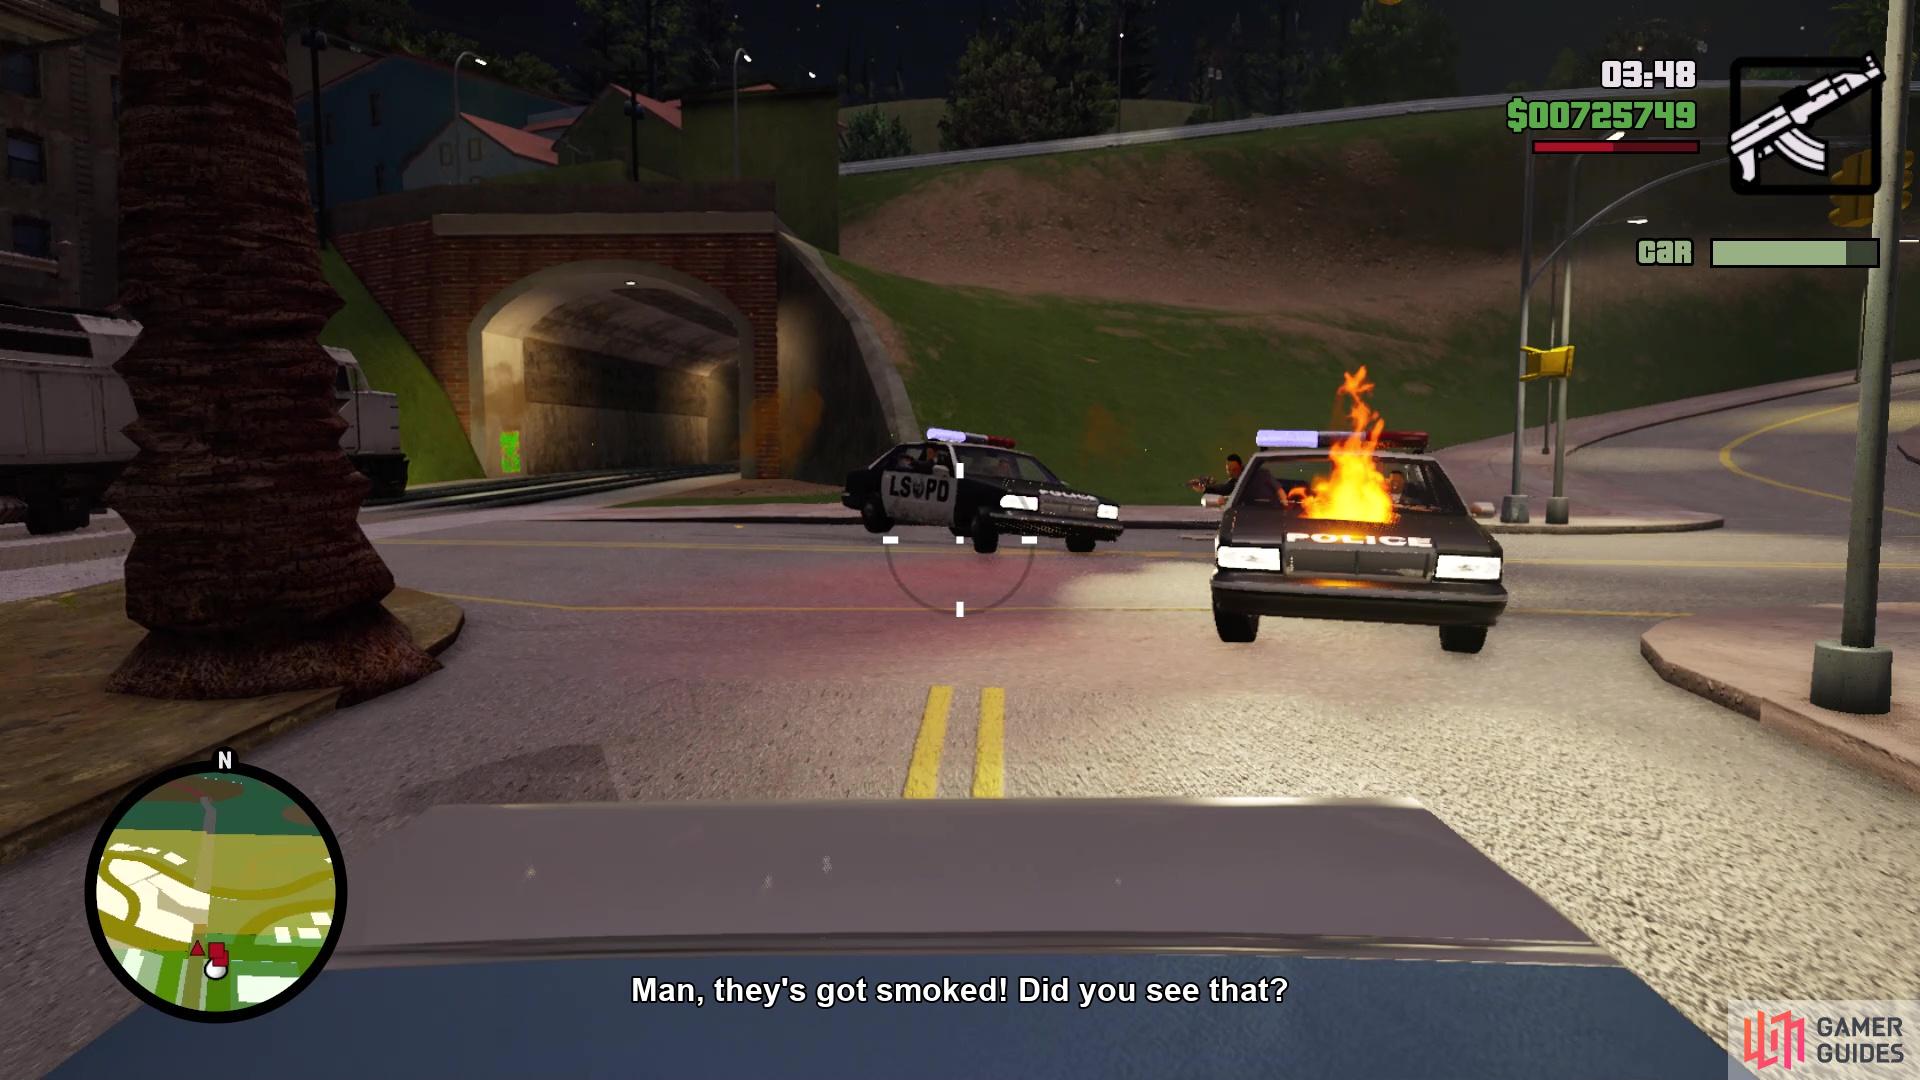 Its best to just fire on the police cars until they explode